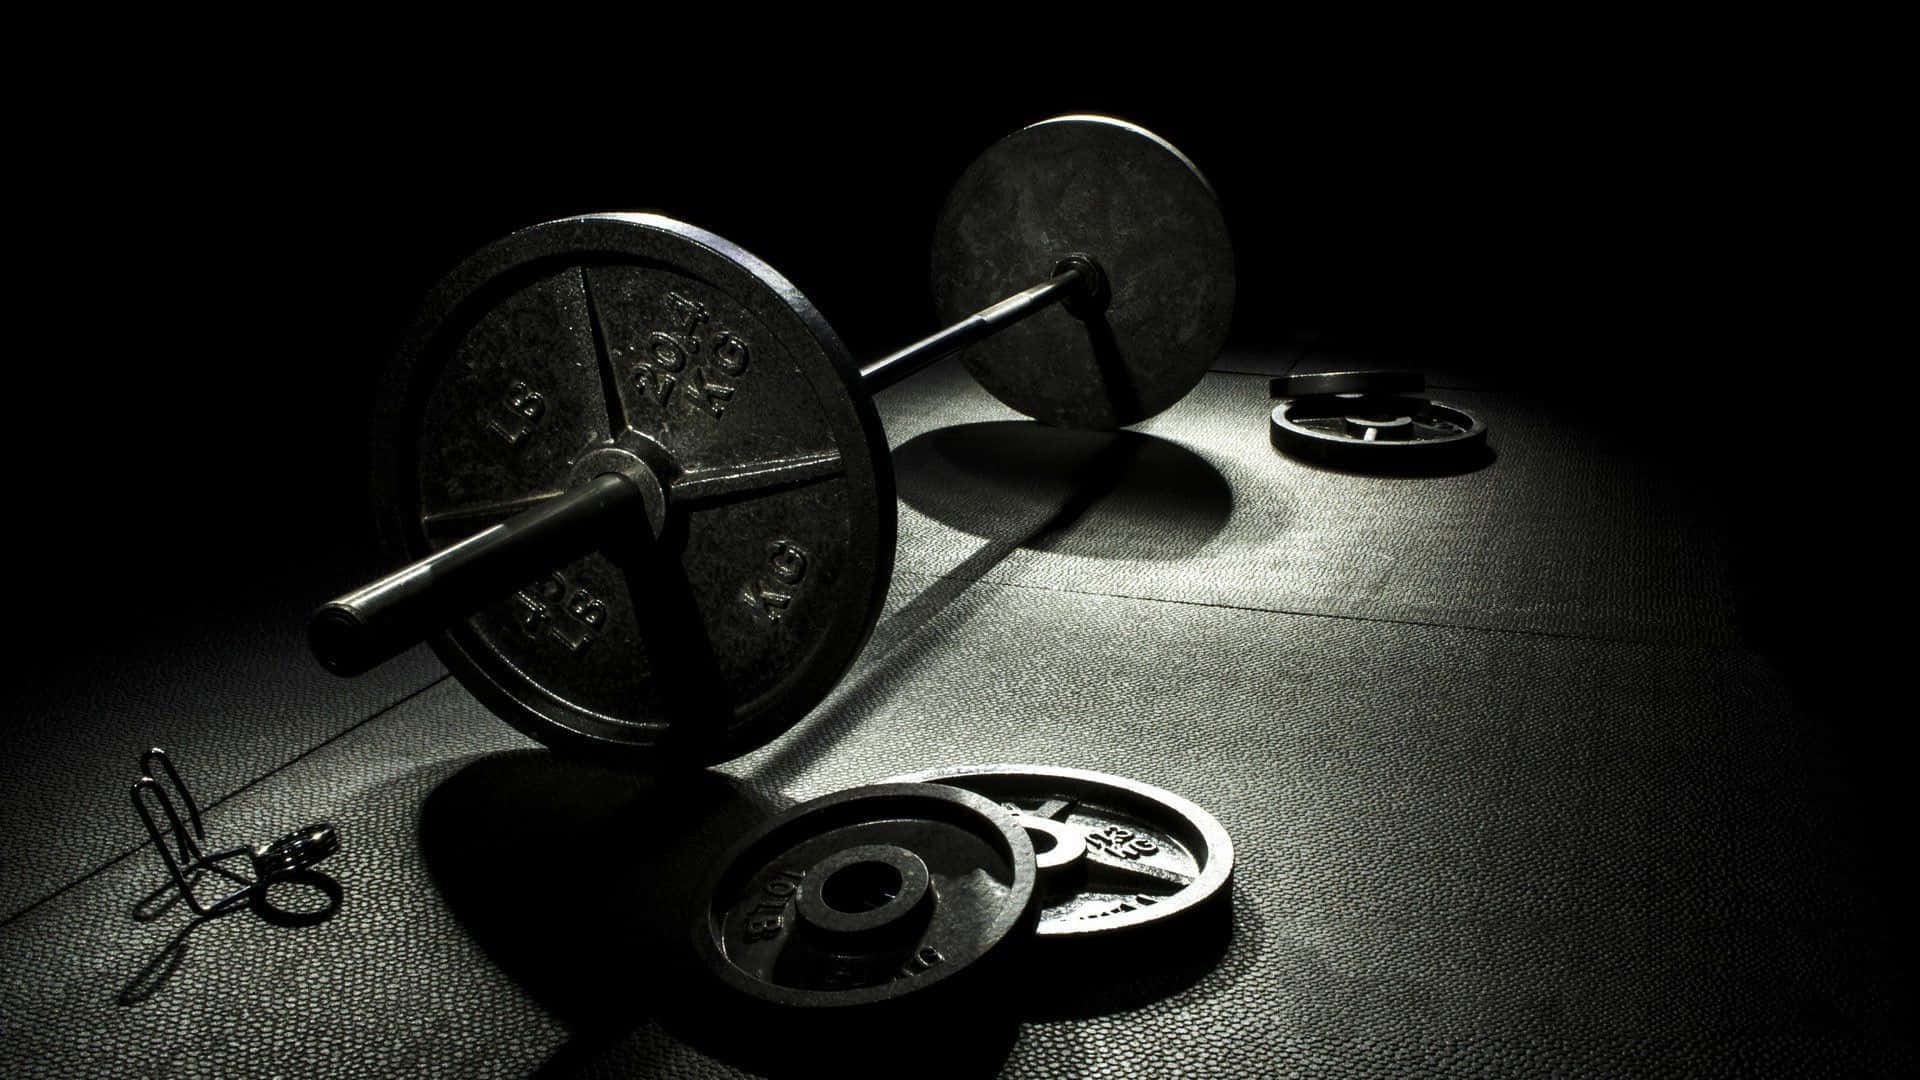 Barbells For Weight Training Wallpaper